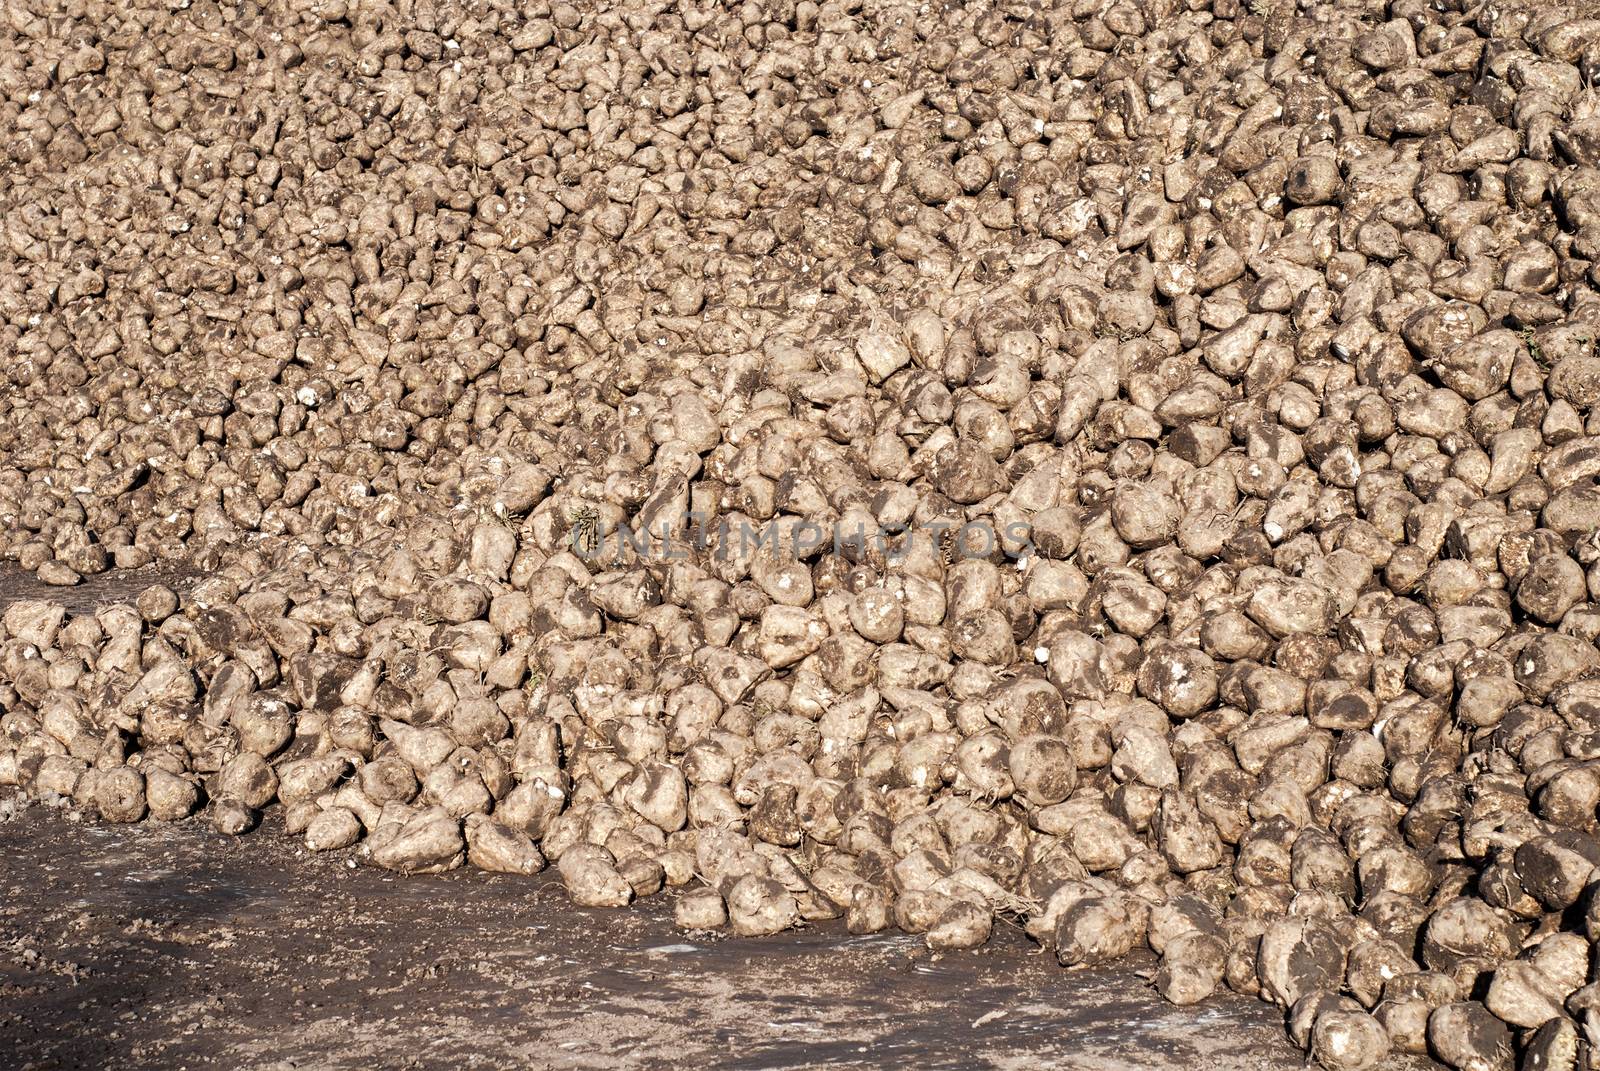 Pile of sugar beets by nejuras